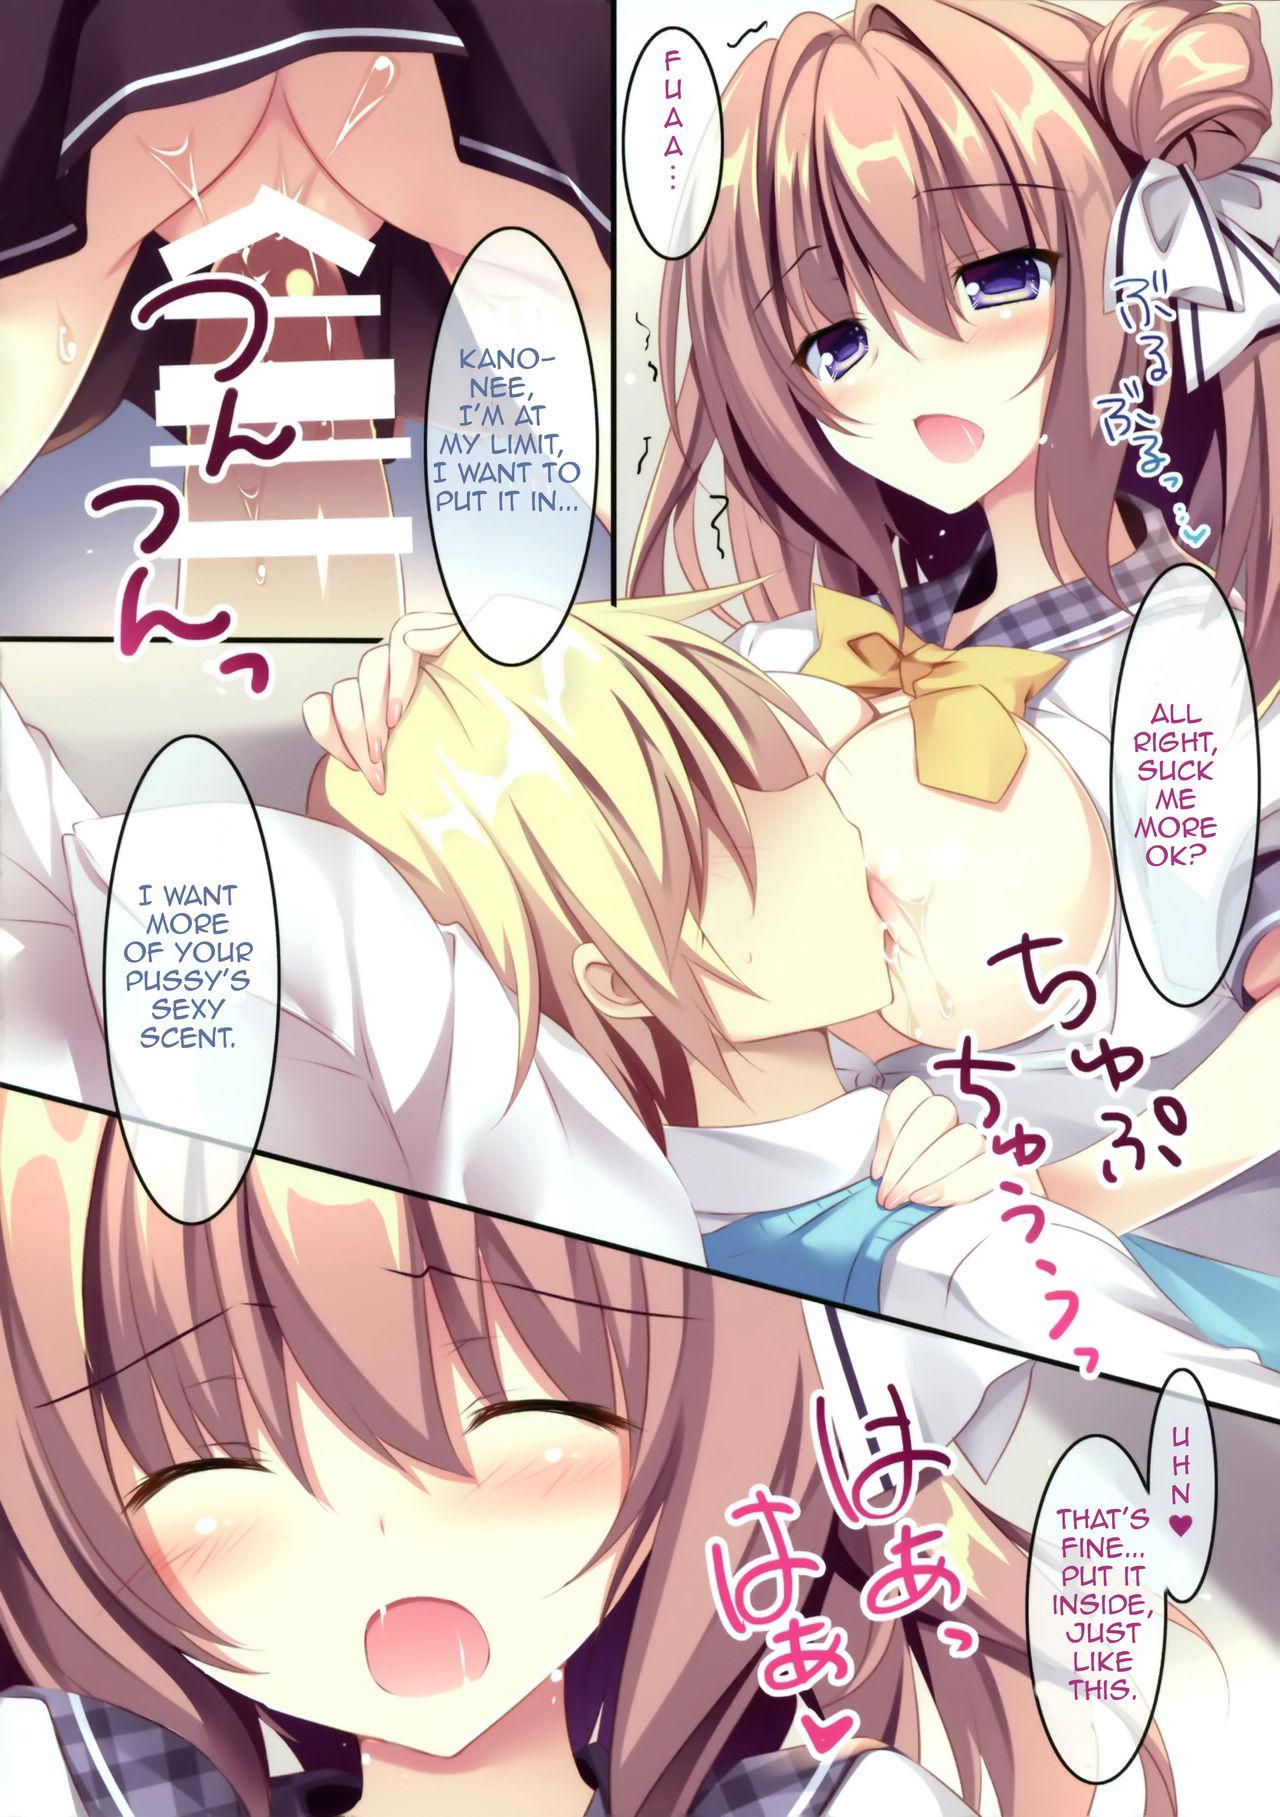 Perfect Tits Daisuki Onee-chan 1 | My Beloved Big Sister 1 - Original Cam Porn - Page 11